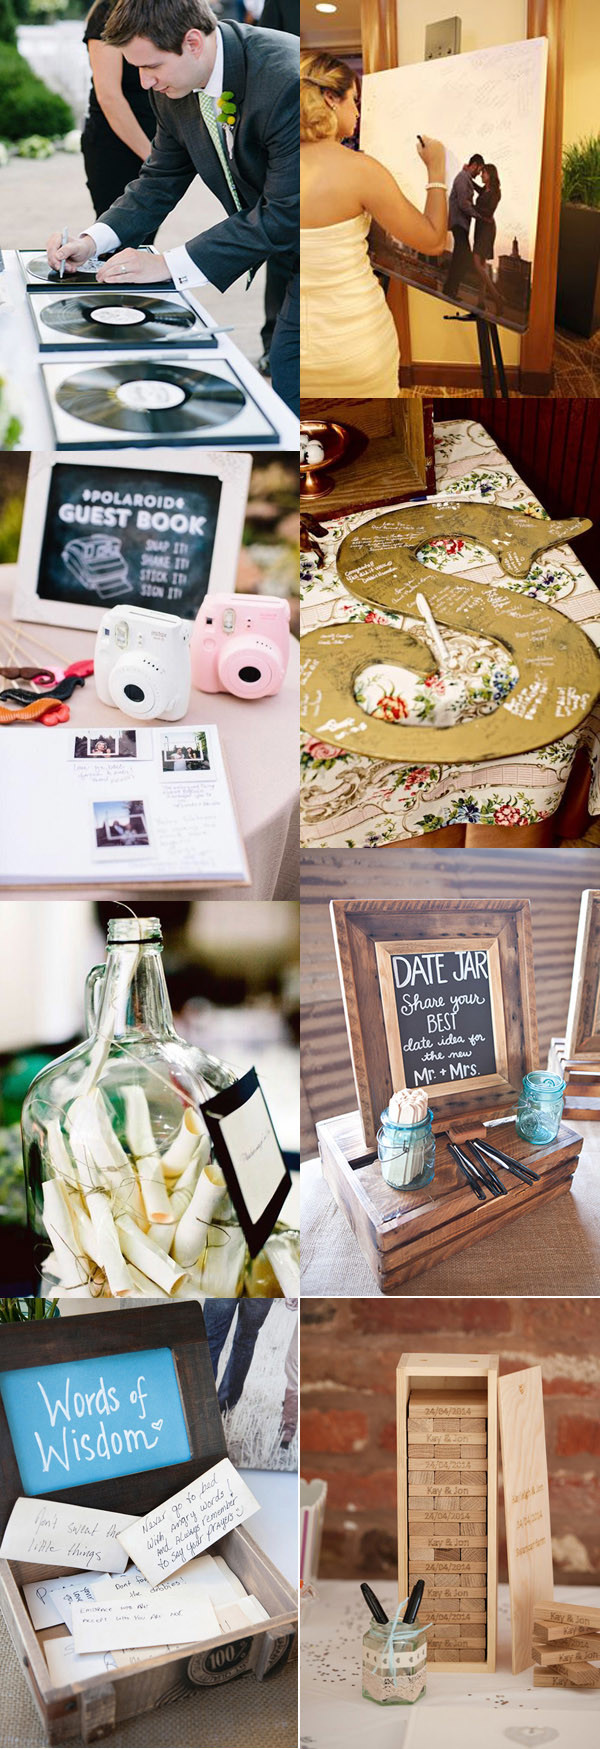 creative-wedding-guest-book-ideas-for-your-big-day